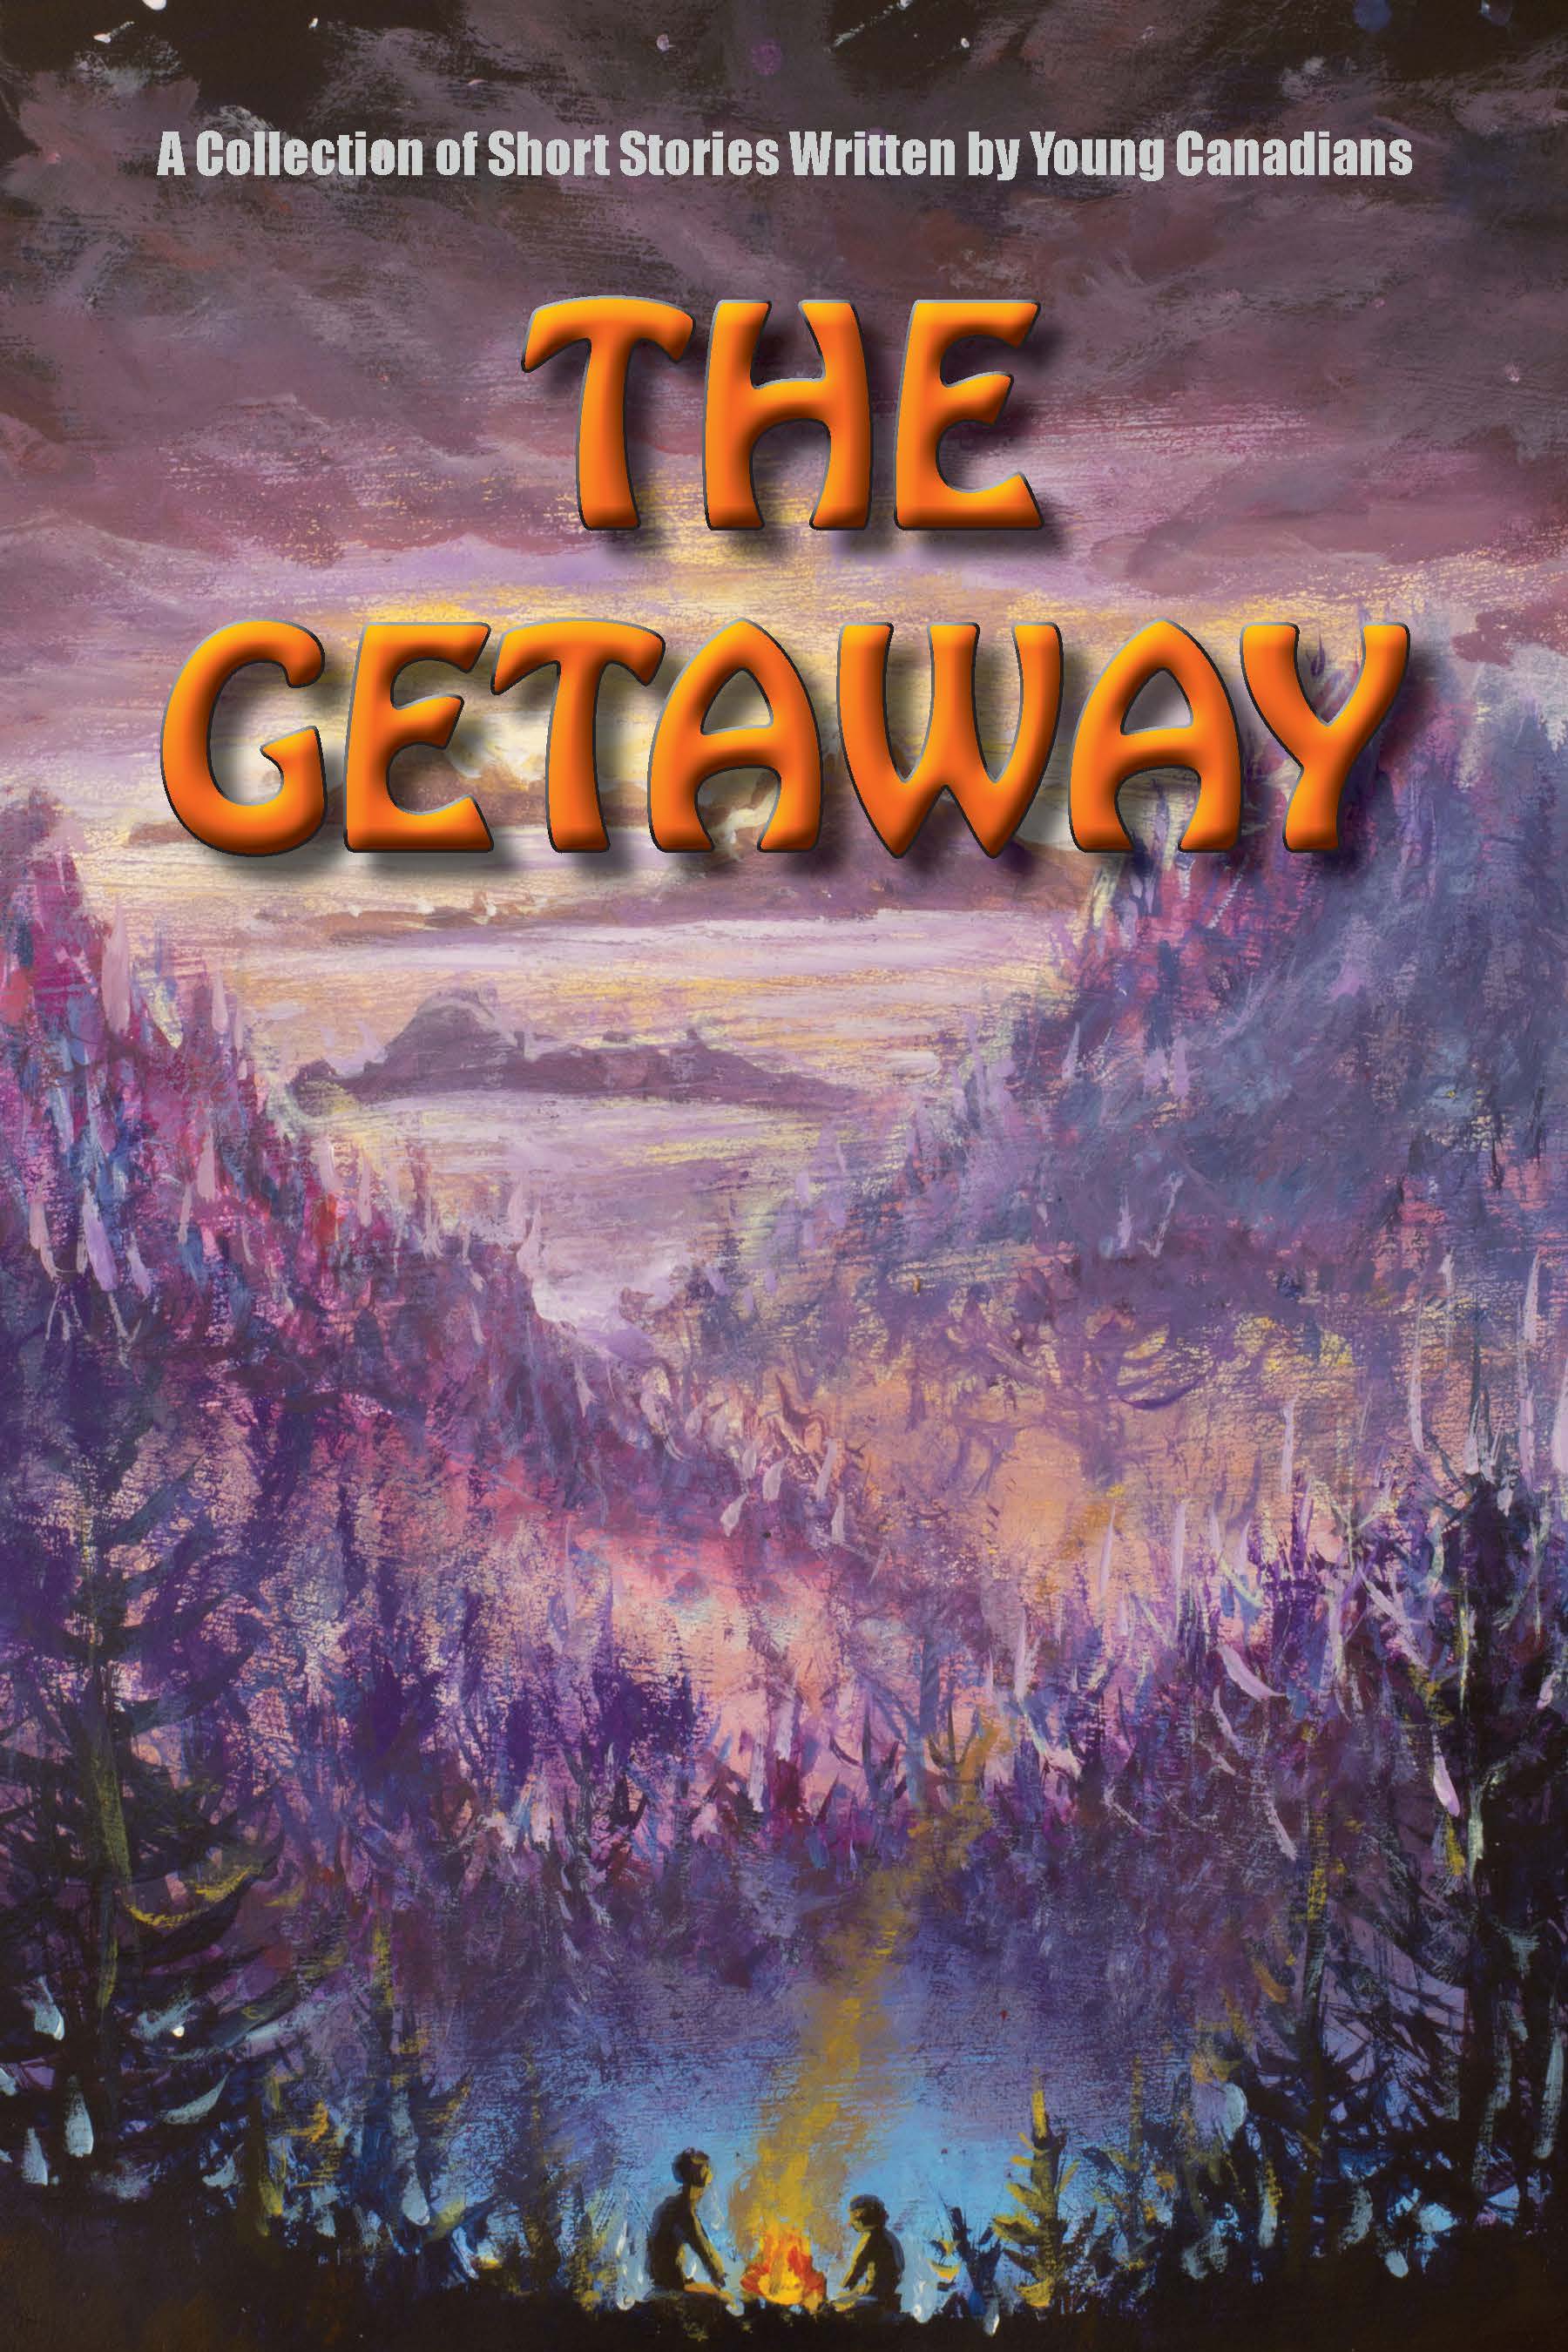 The Getaway 2019-2020 Grades Seven and Eight Student Story Collection